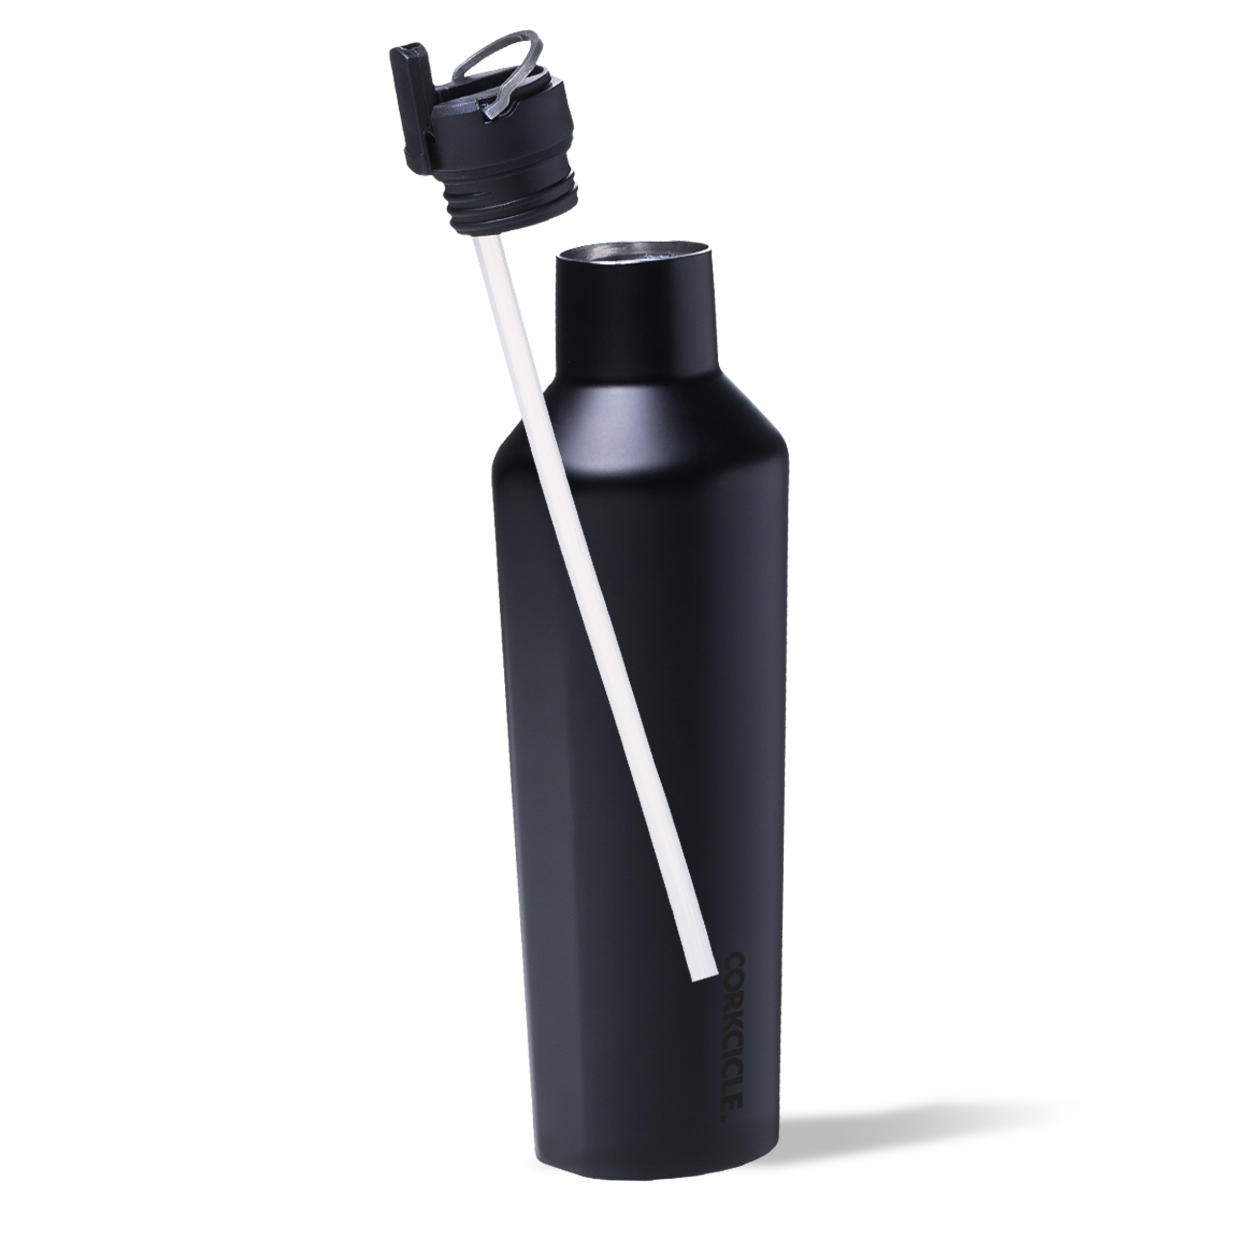 CORKCICLE CANTEEN CAP WITH STRAW